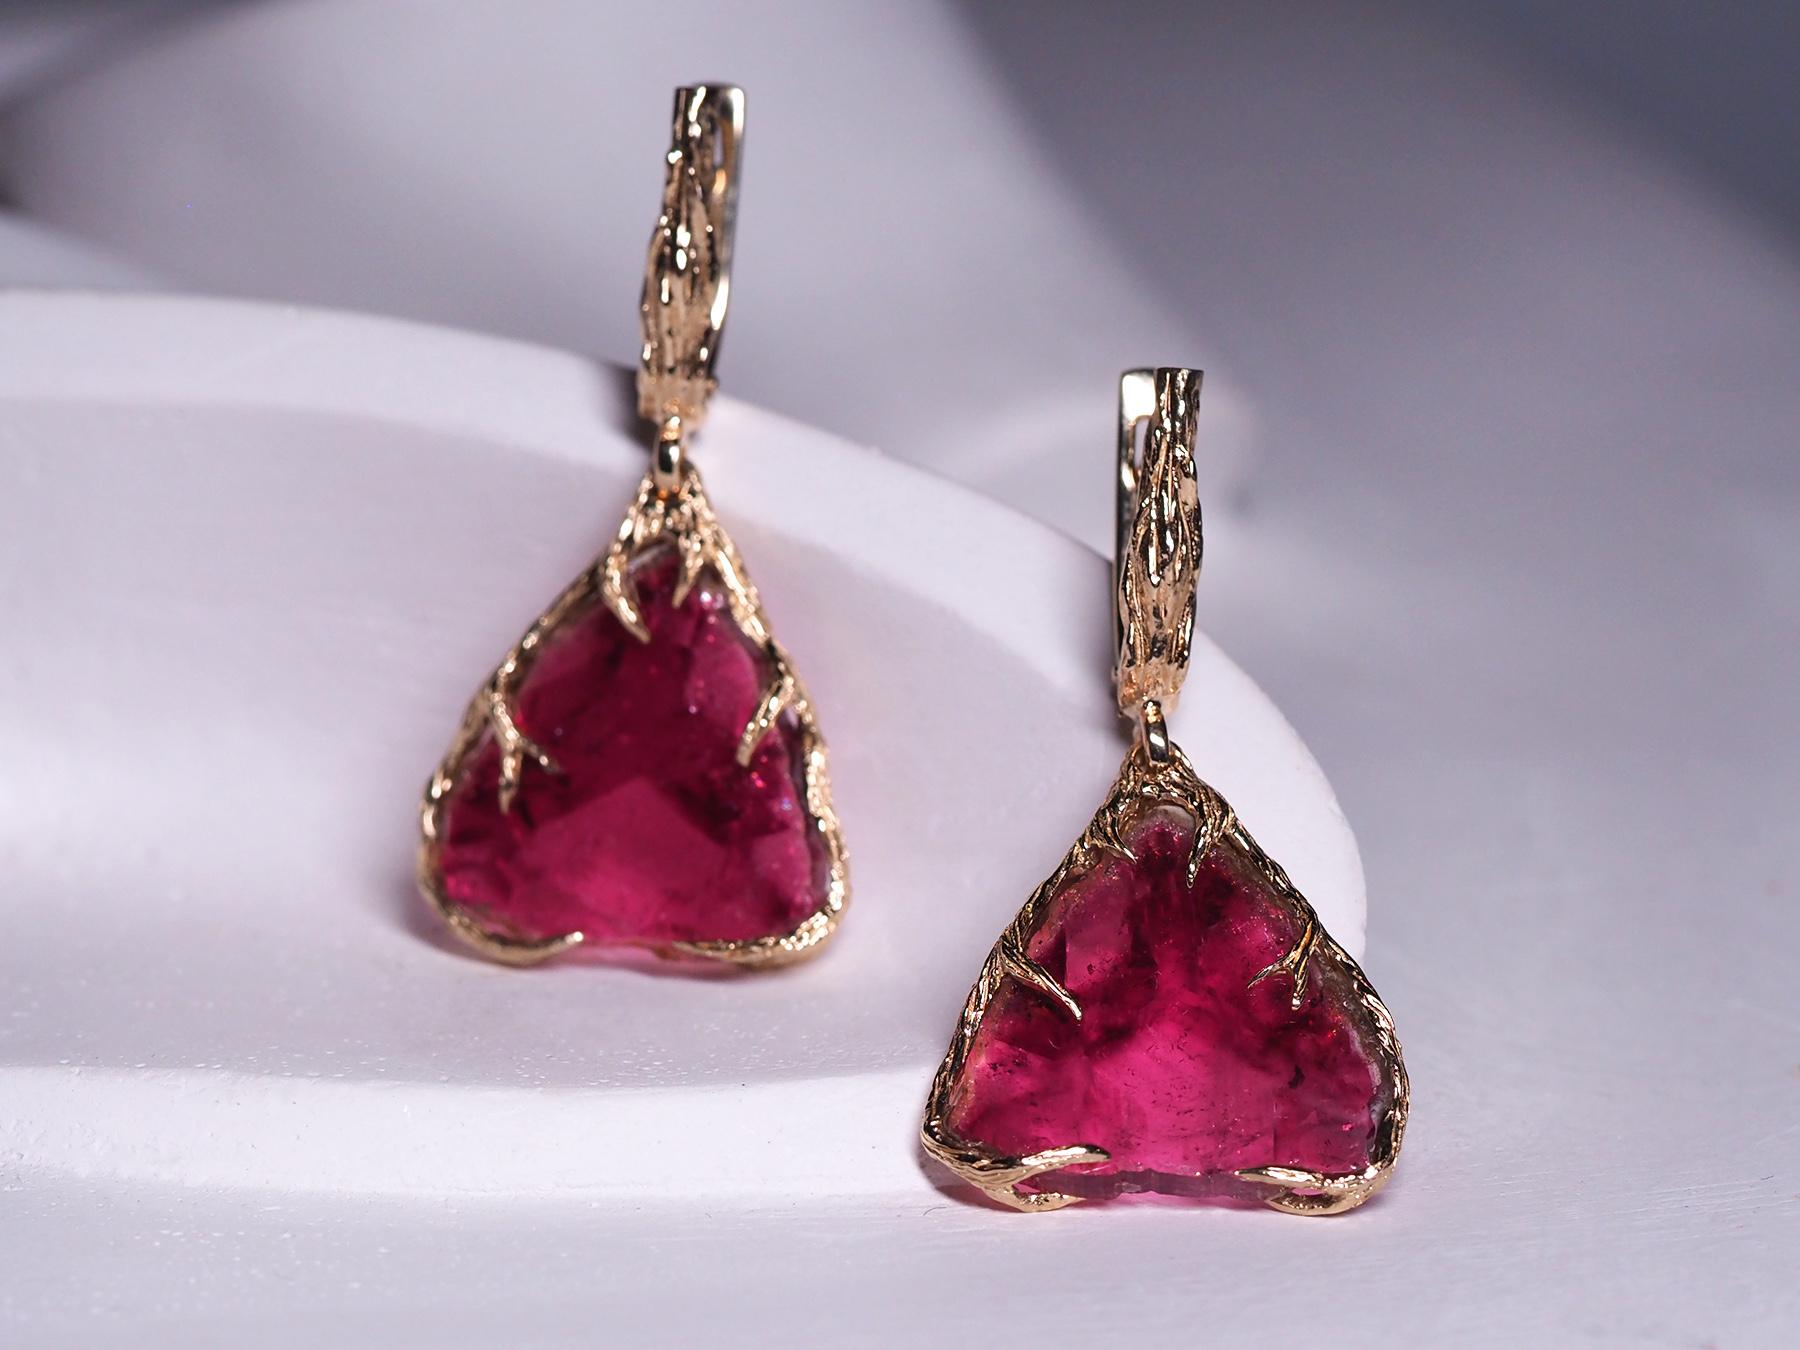 Sliced Natural Rubellite Tourmaline Dangle Earrings in 14k Textured Gold

Inspired by the earth’s incredible beauty, these exquisite hand made rubellite tourmaline dangle earrings are truly one of a kind in craftsmanship and innovative creation. Two